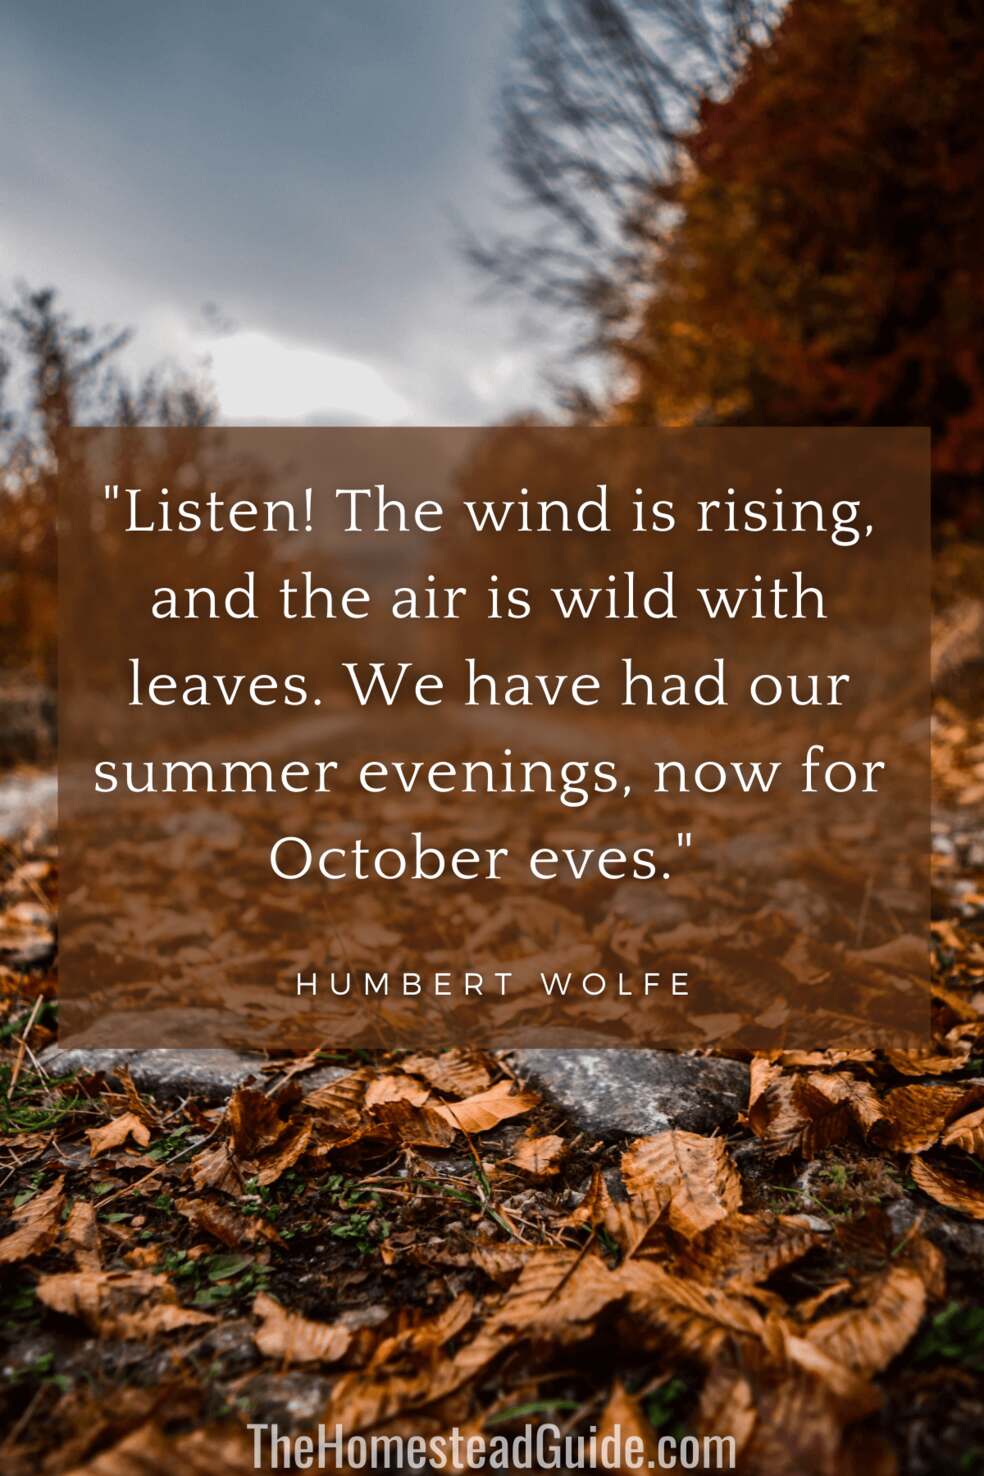 Listen! The wind is rising, and the air is wild with leaves. We have had our summer evenings, now for October eves.